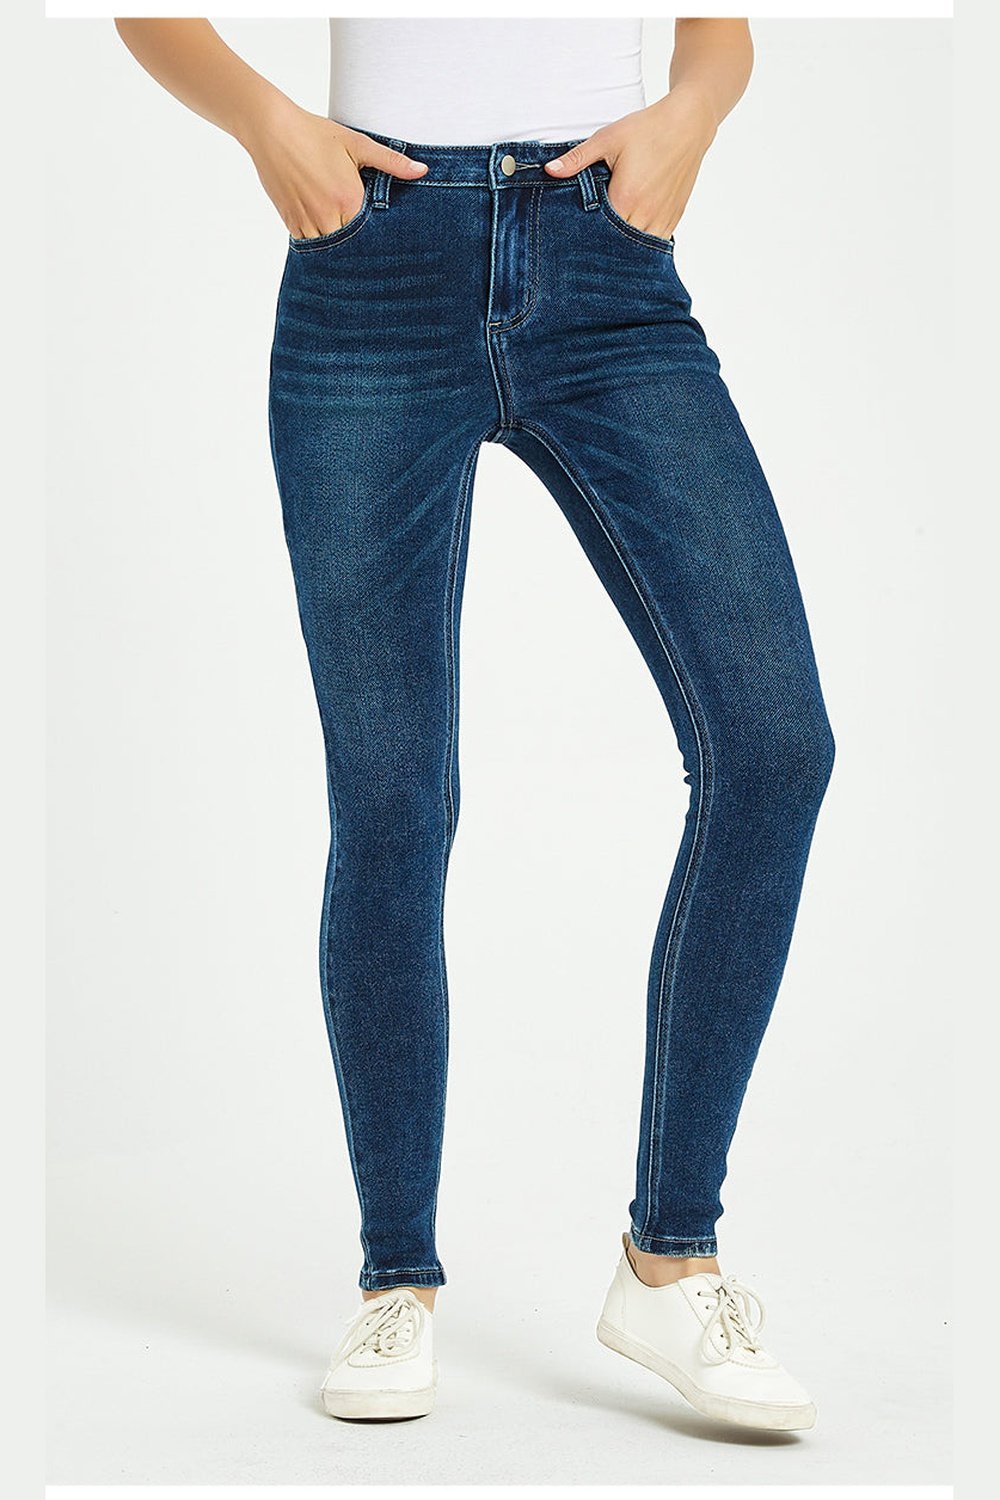 Full Size Mid-Rise Waist Skinny Jeans - Jeans - FITGGINS